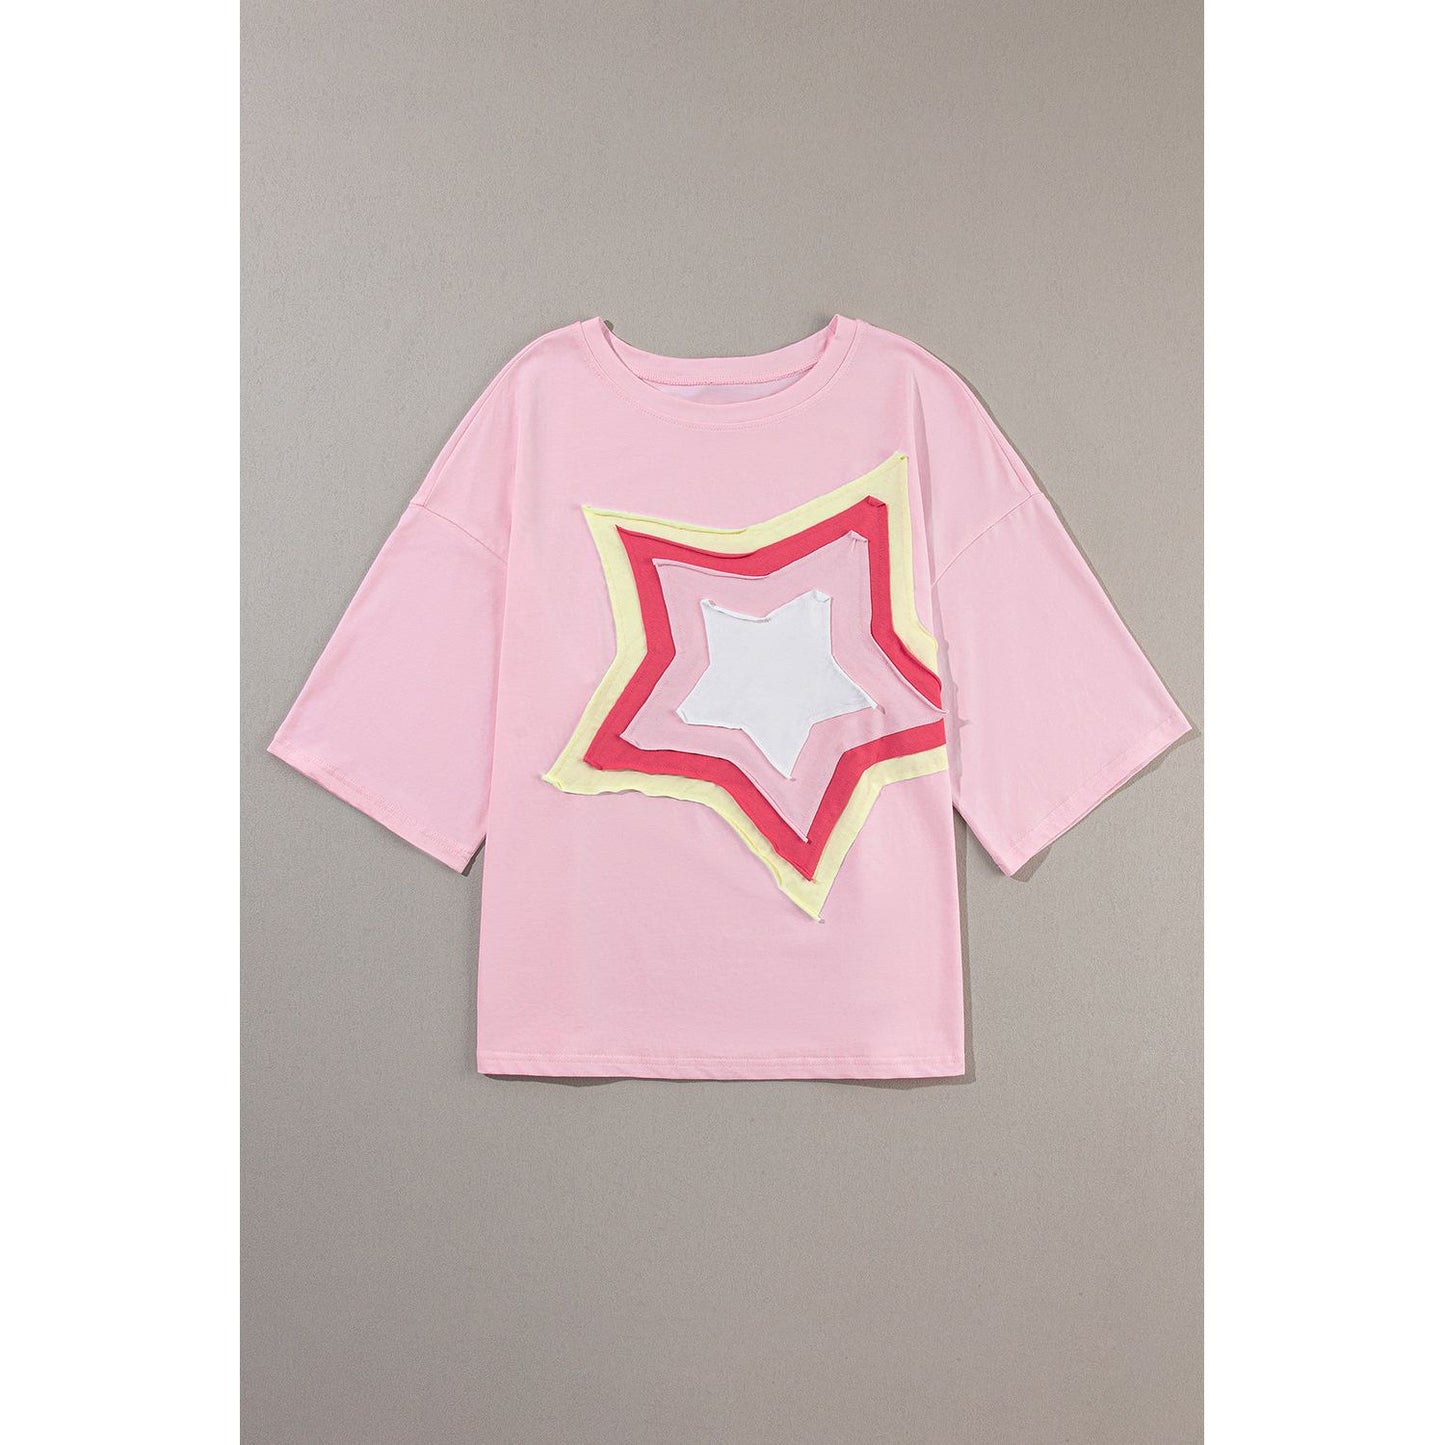 Shooting Star Light Pink Patched Half Sleeve Oversized Tee